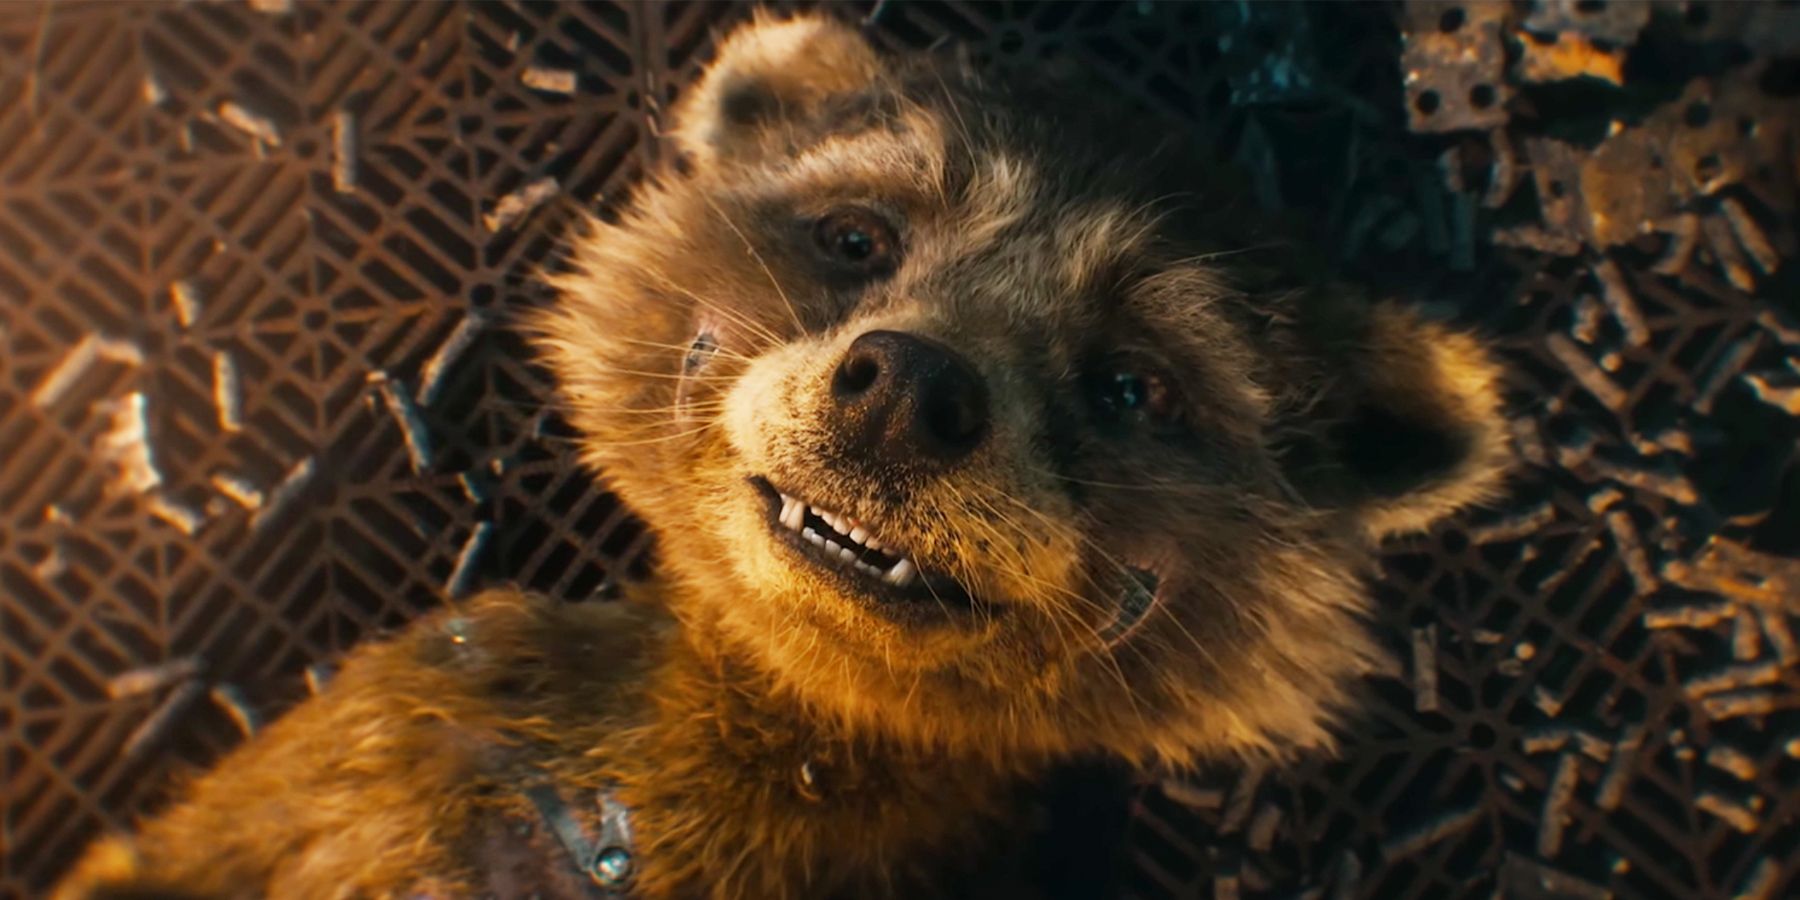 James Gunn Gives Surprising Update On Rocket Racoon In Guardians Of The Galaxy 3